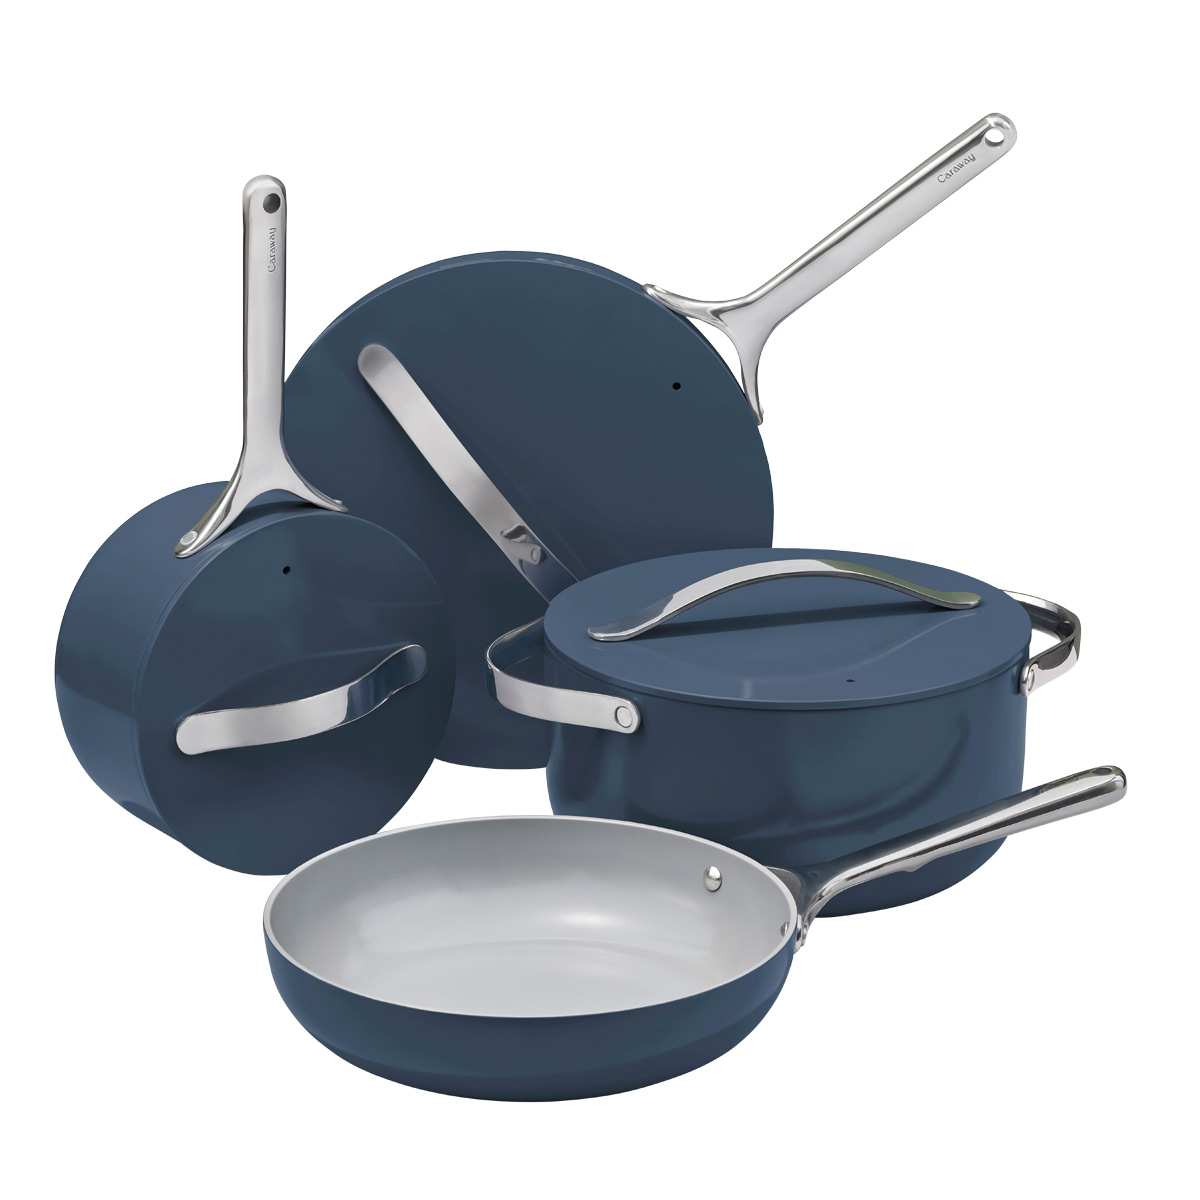 https://www.containerstore.com/catalogimages/518100/10091977-Caraway_CW-Set_Navy_01-ven.jpg